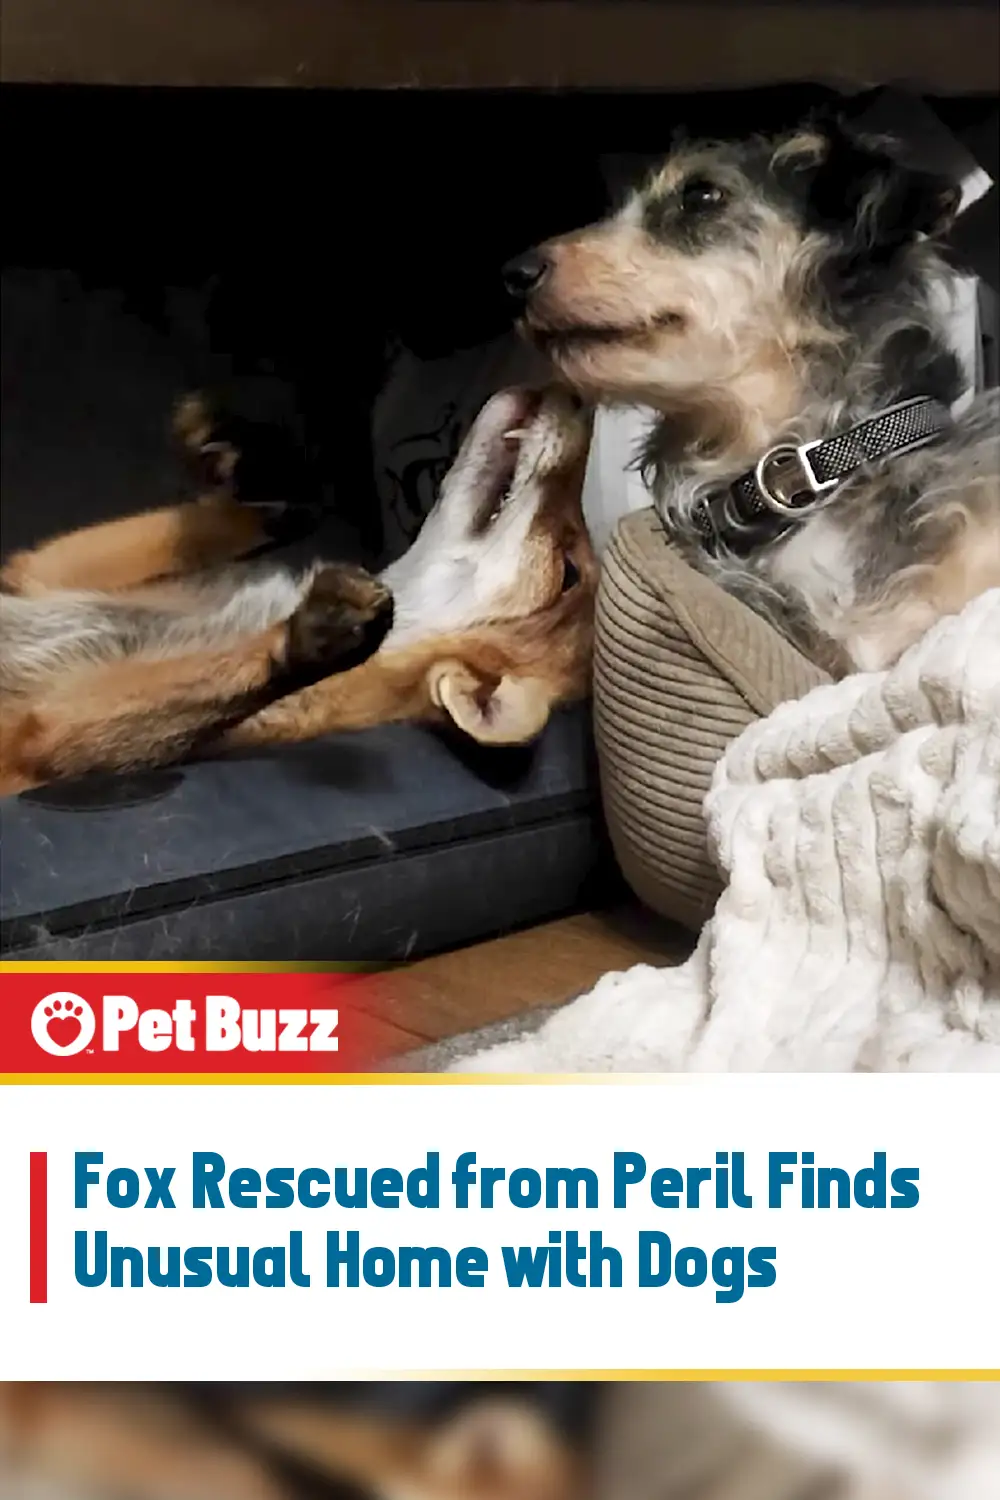 Fox Rescued from Peril Finds Unusual Home with Dogs